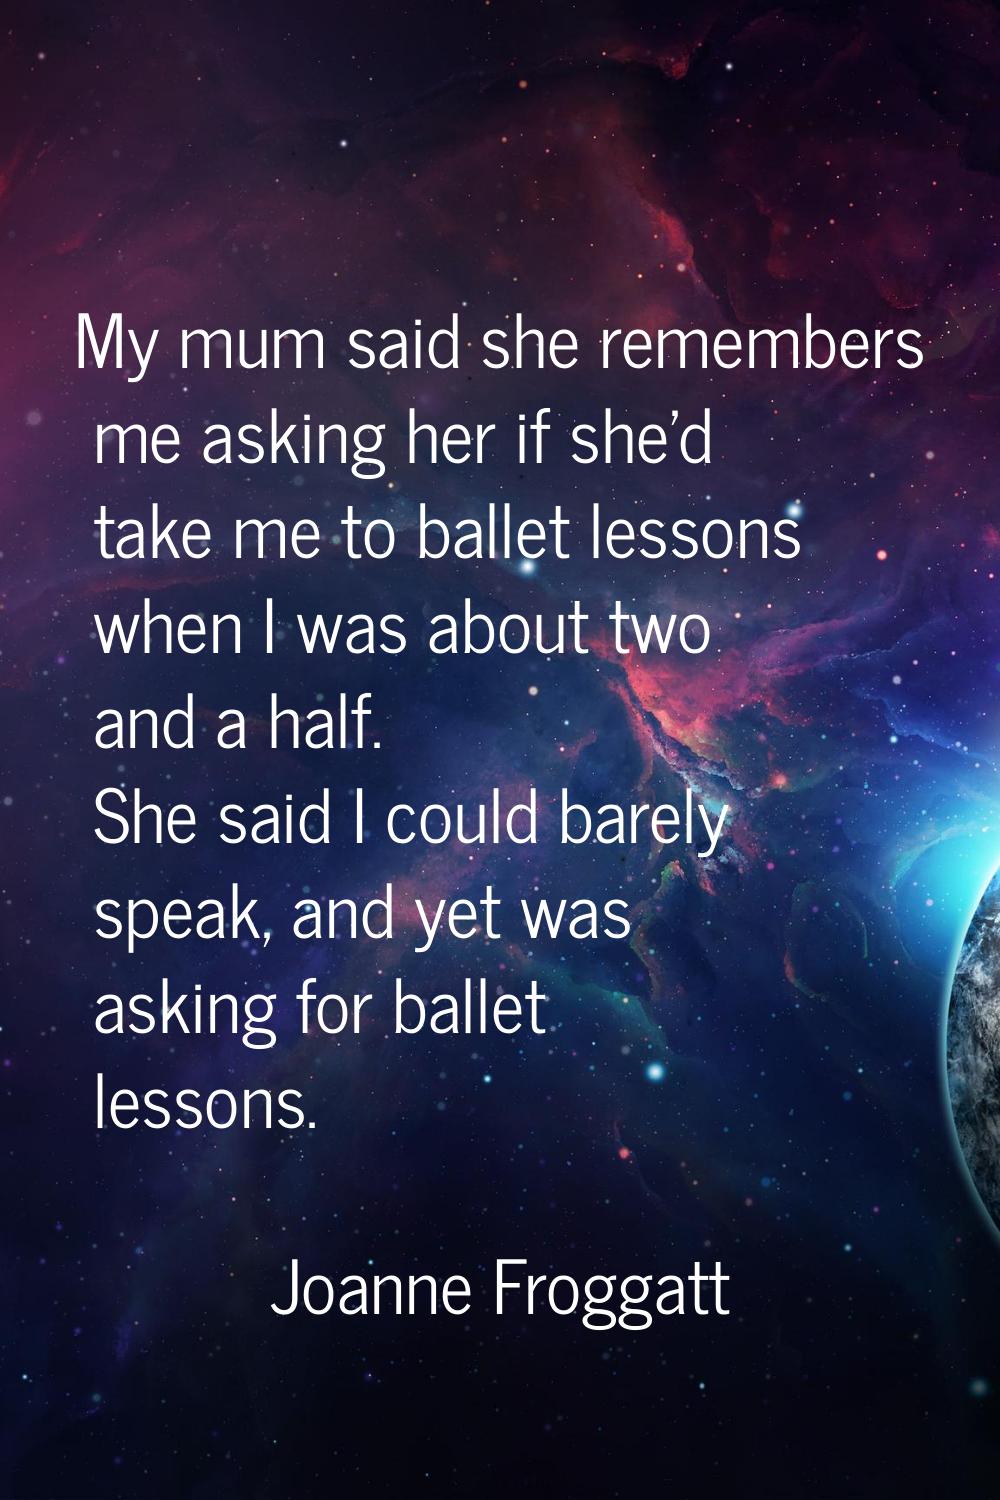 My mum said she remembers me asking her if she'd take me to ballet lessons when I was about two and